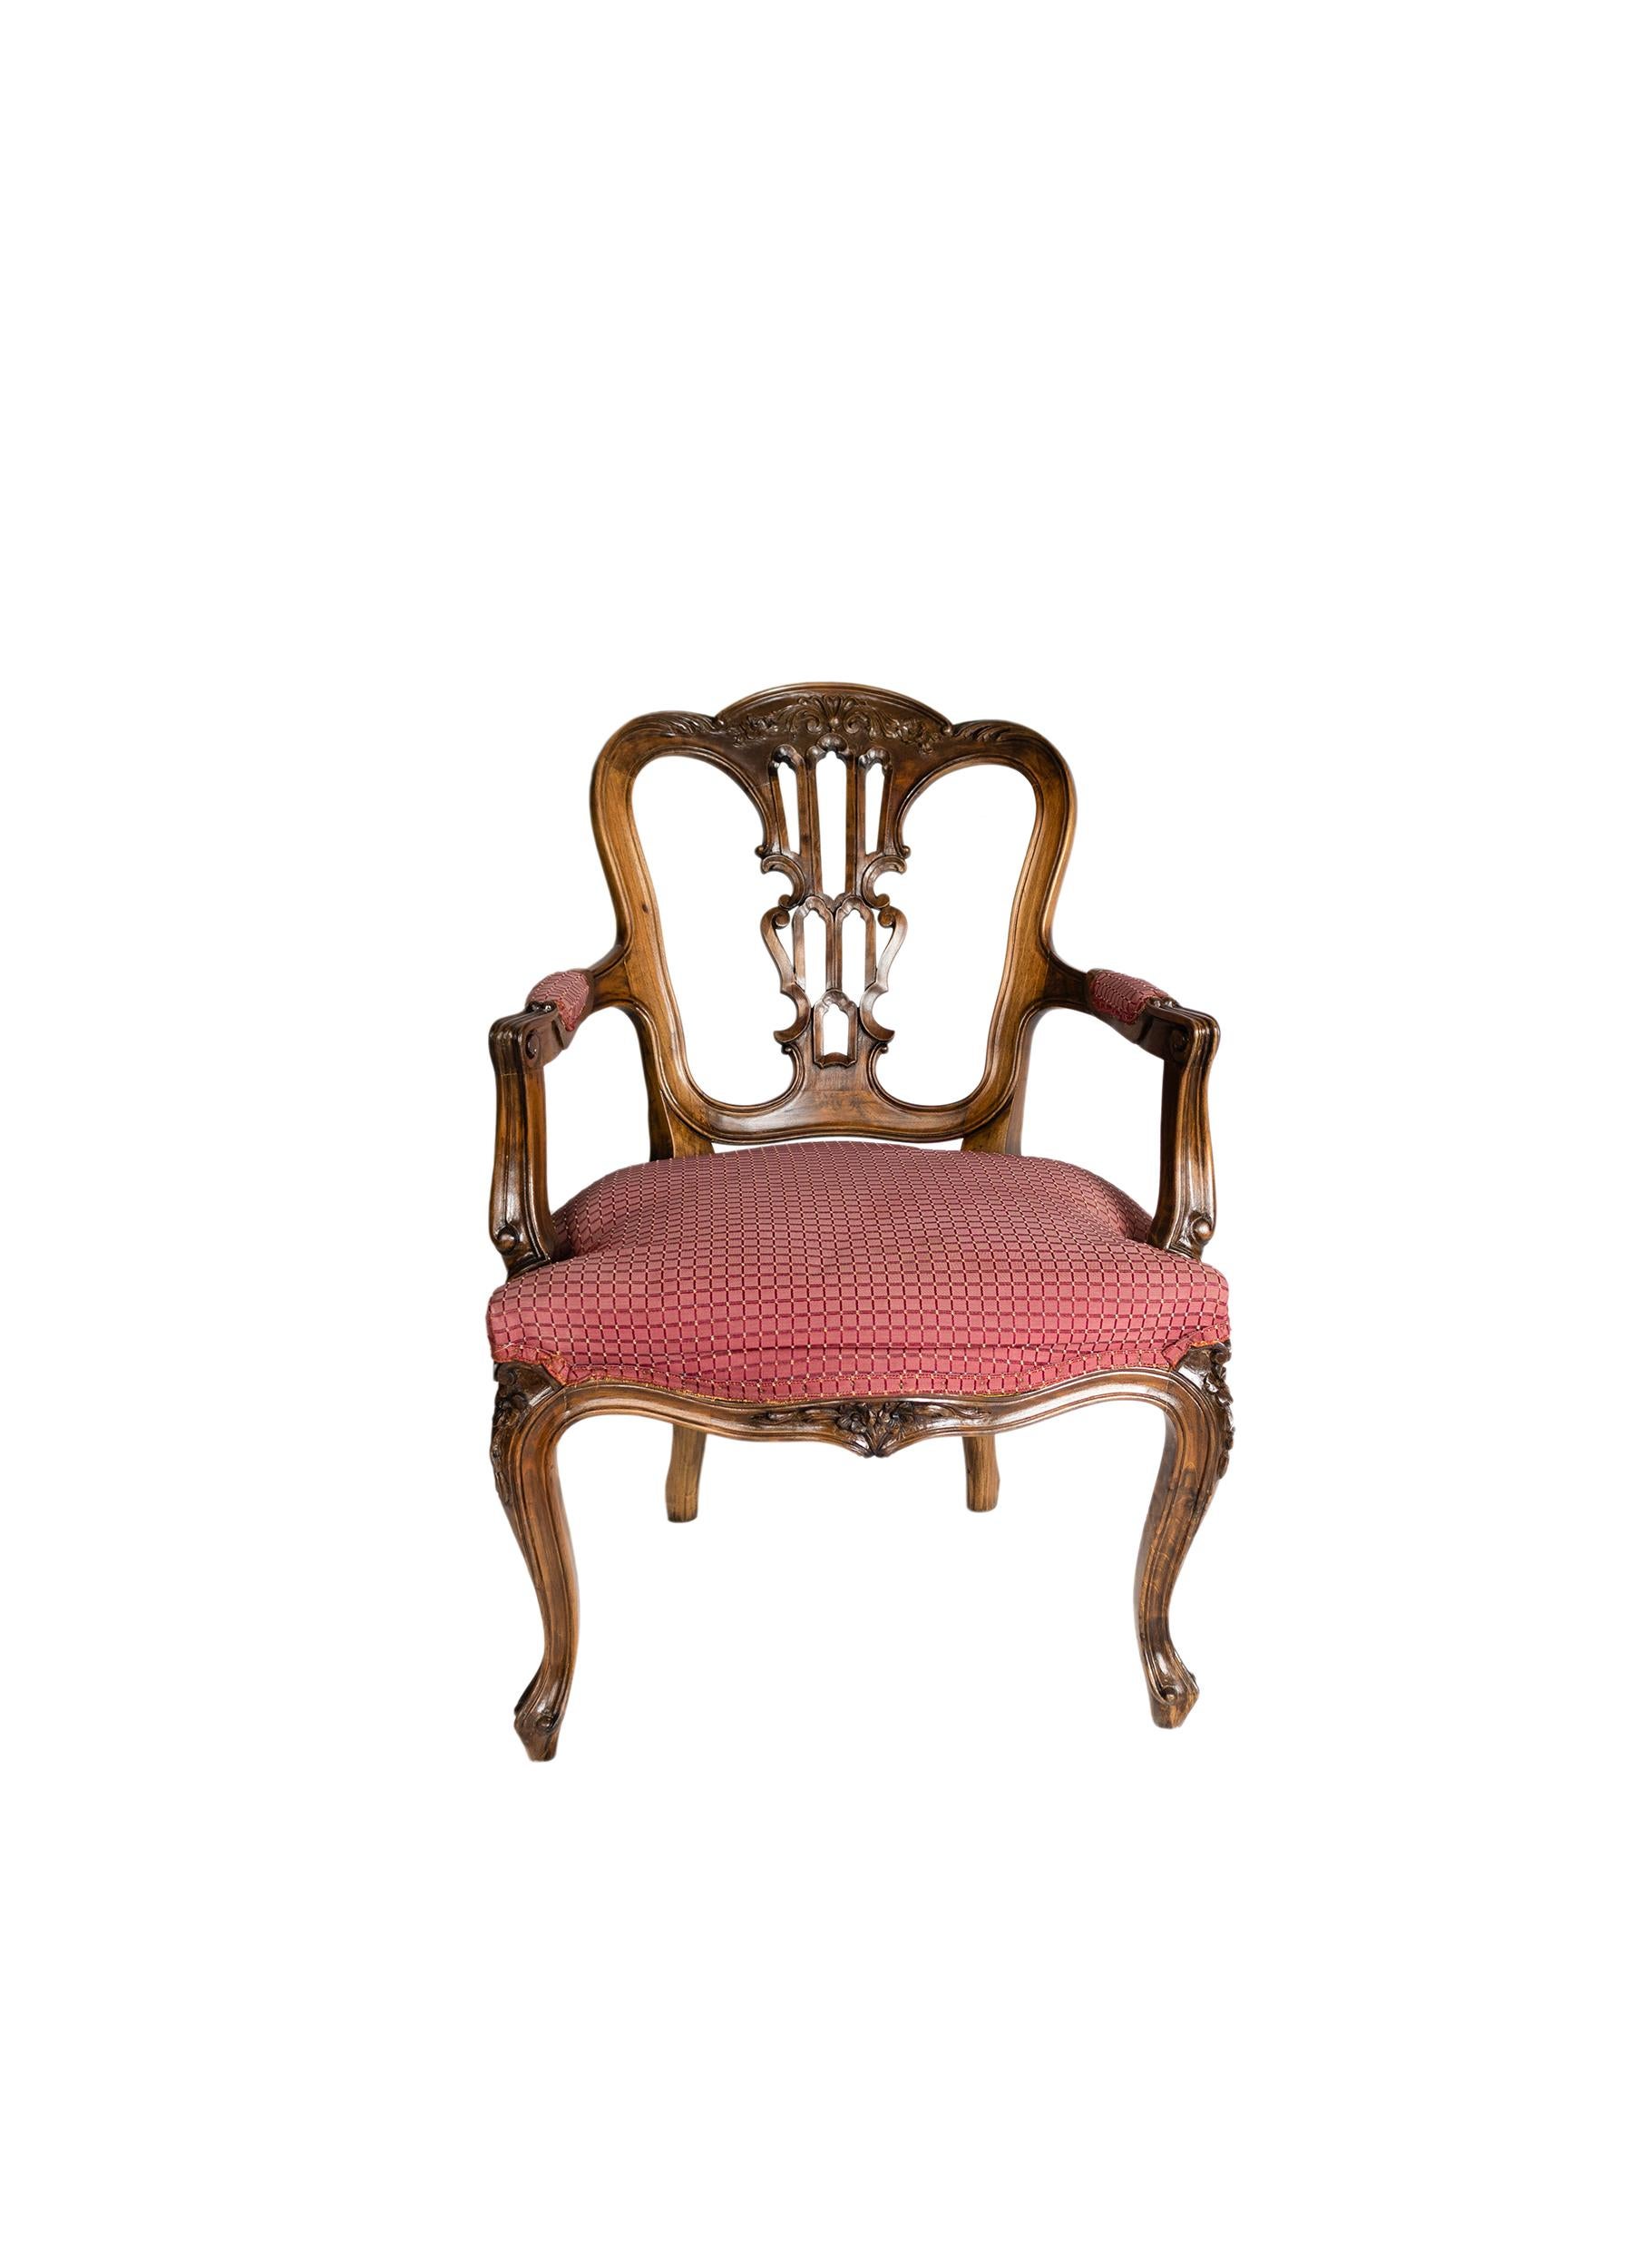 A Venetian-style armchair (fauteuil) in walnut, vegetarist carvings, curved backrest of central table, open arms and curved legs and seat upholstered in red pattern fabric.